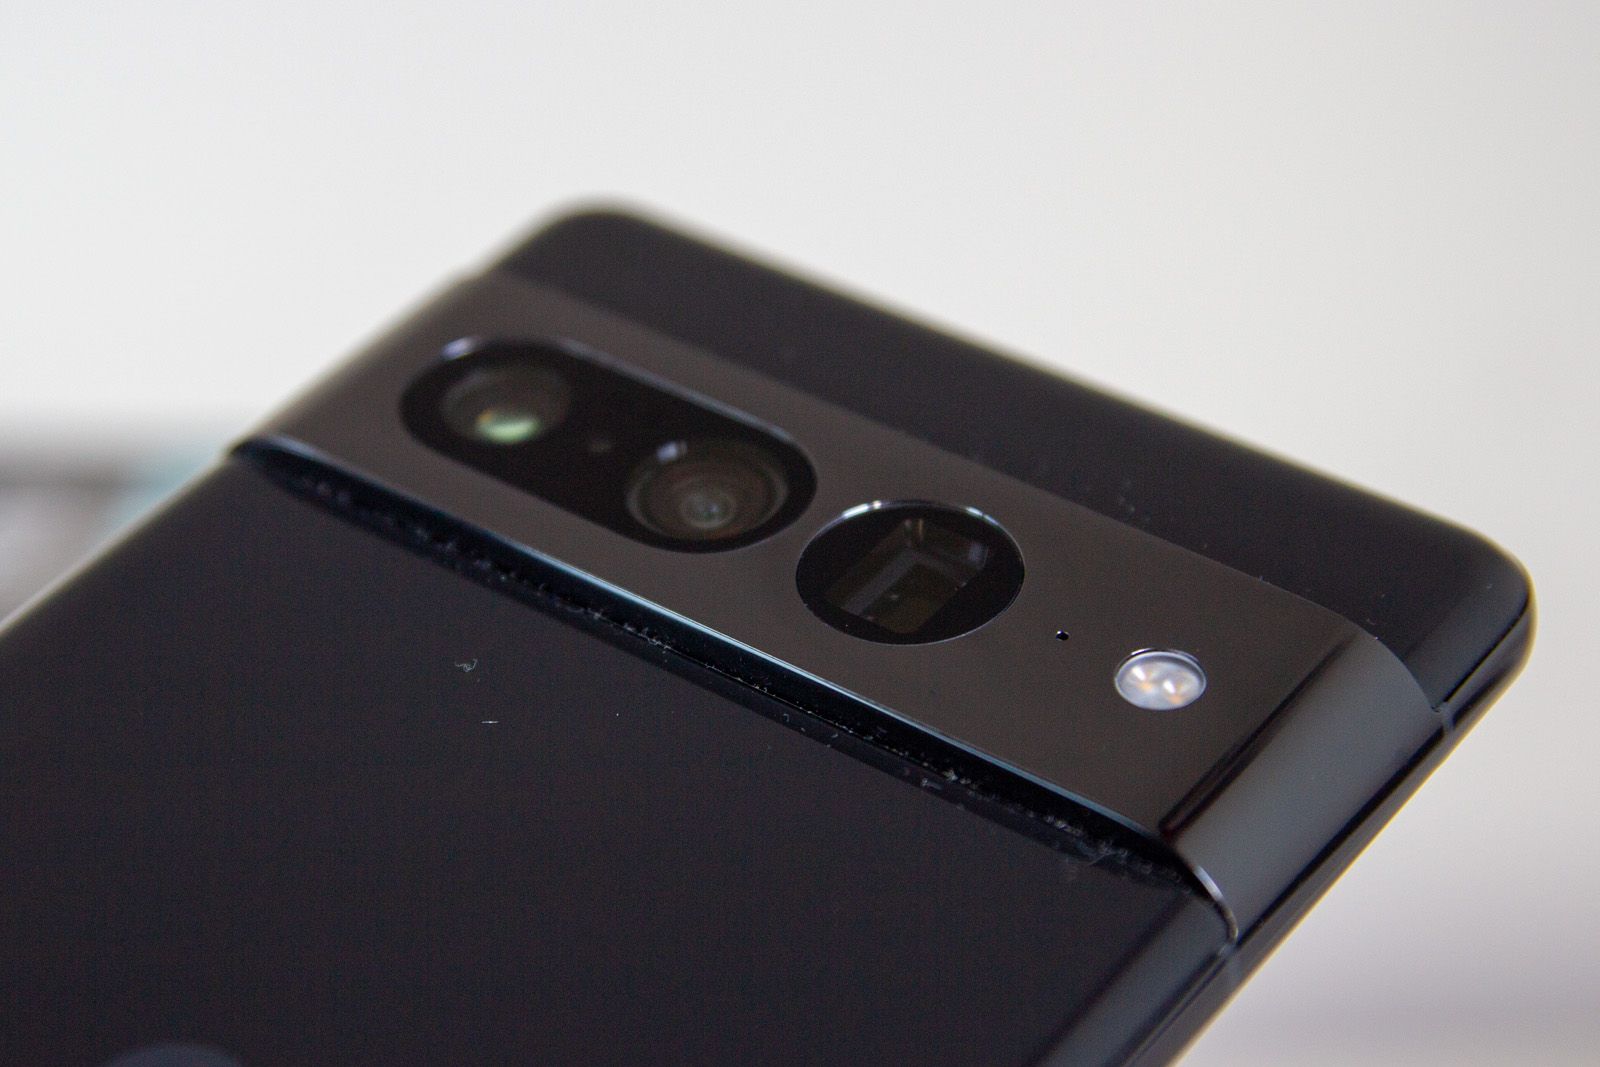 The rear view of the Pixel 7 Pro shows the cameras